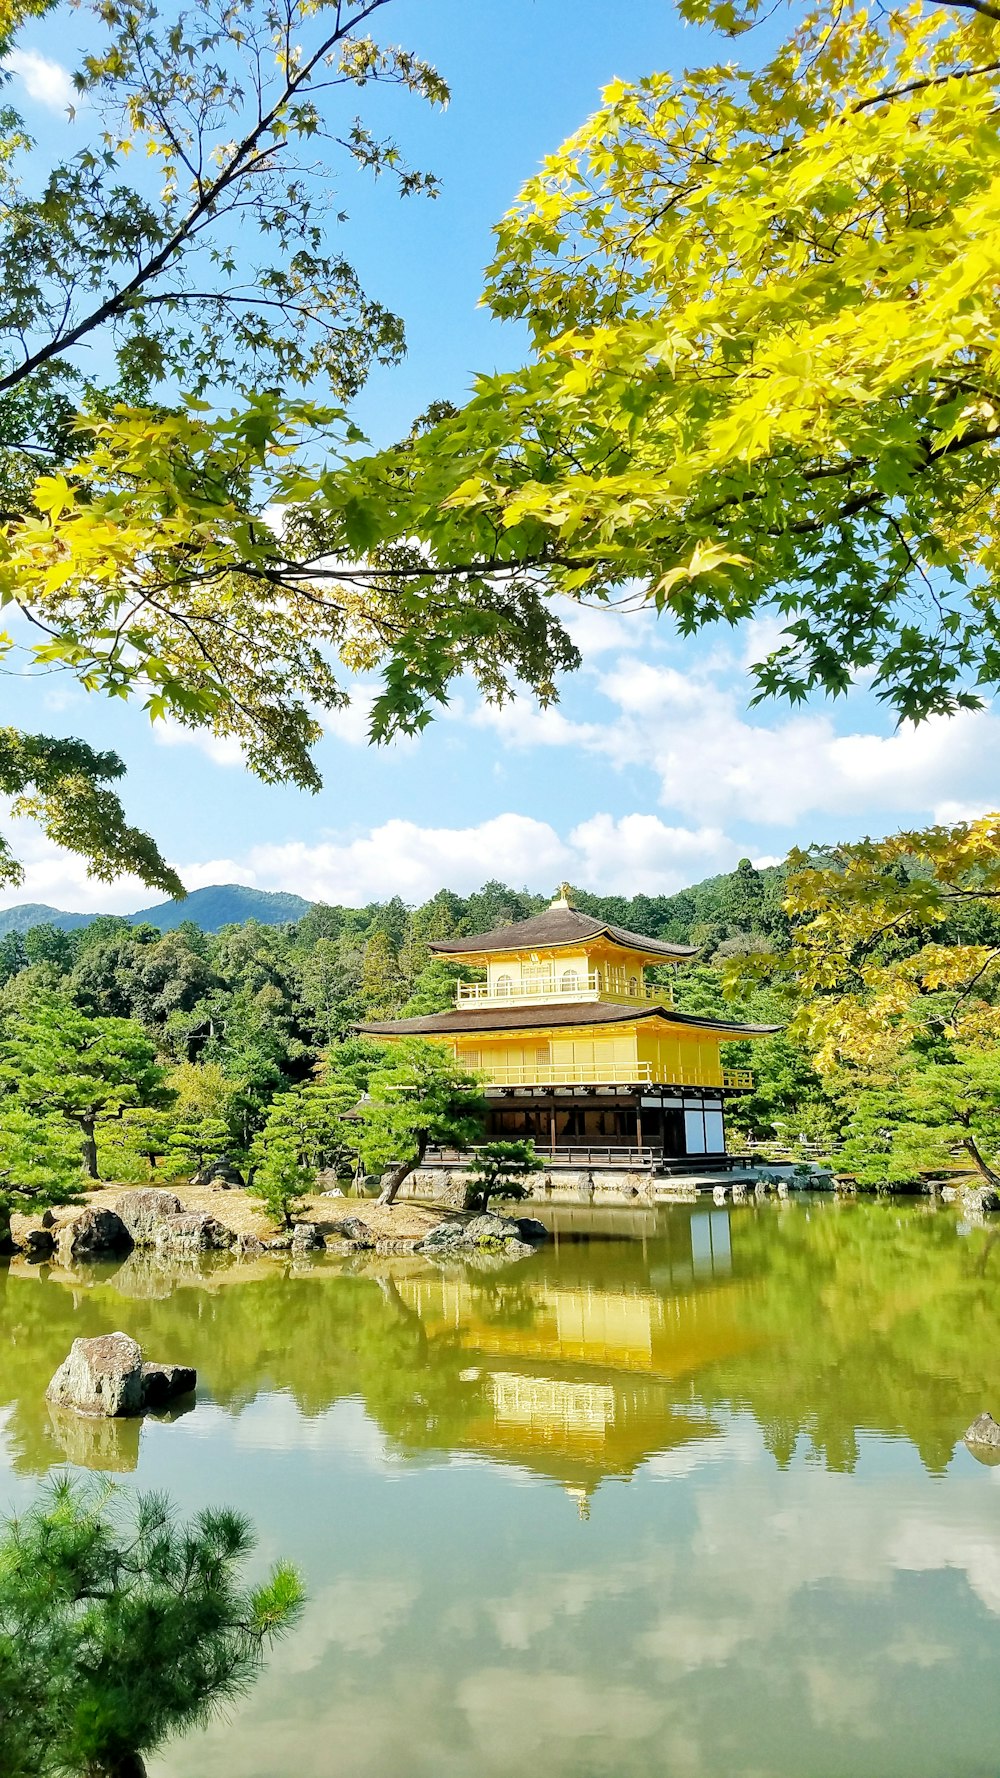 yellow temple facing body of water surrounded with trees